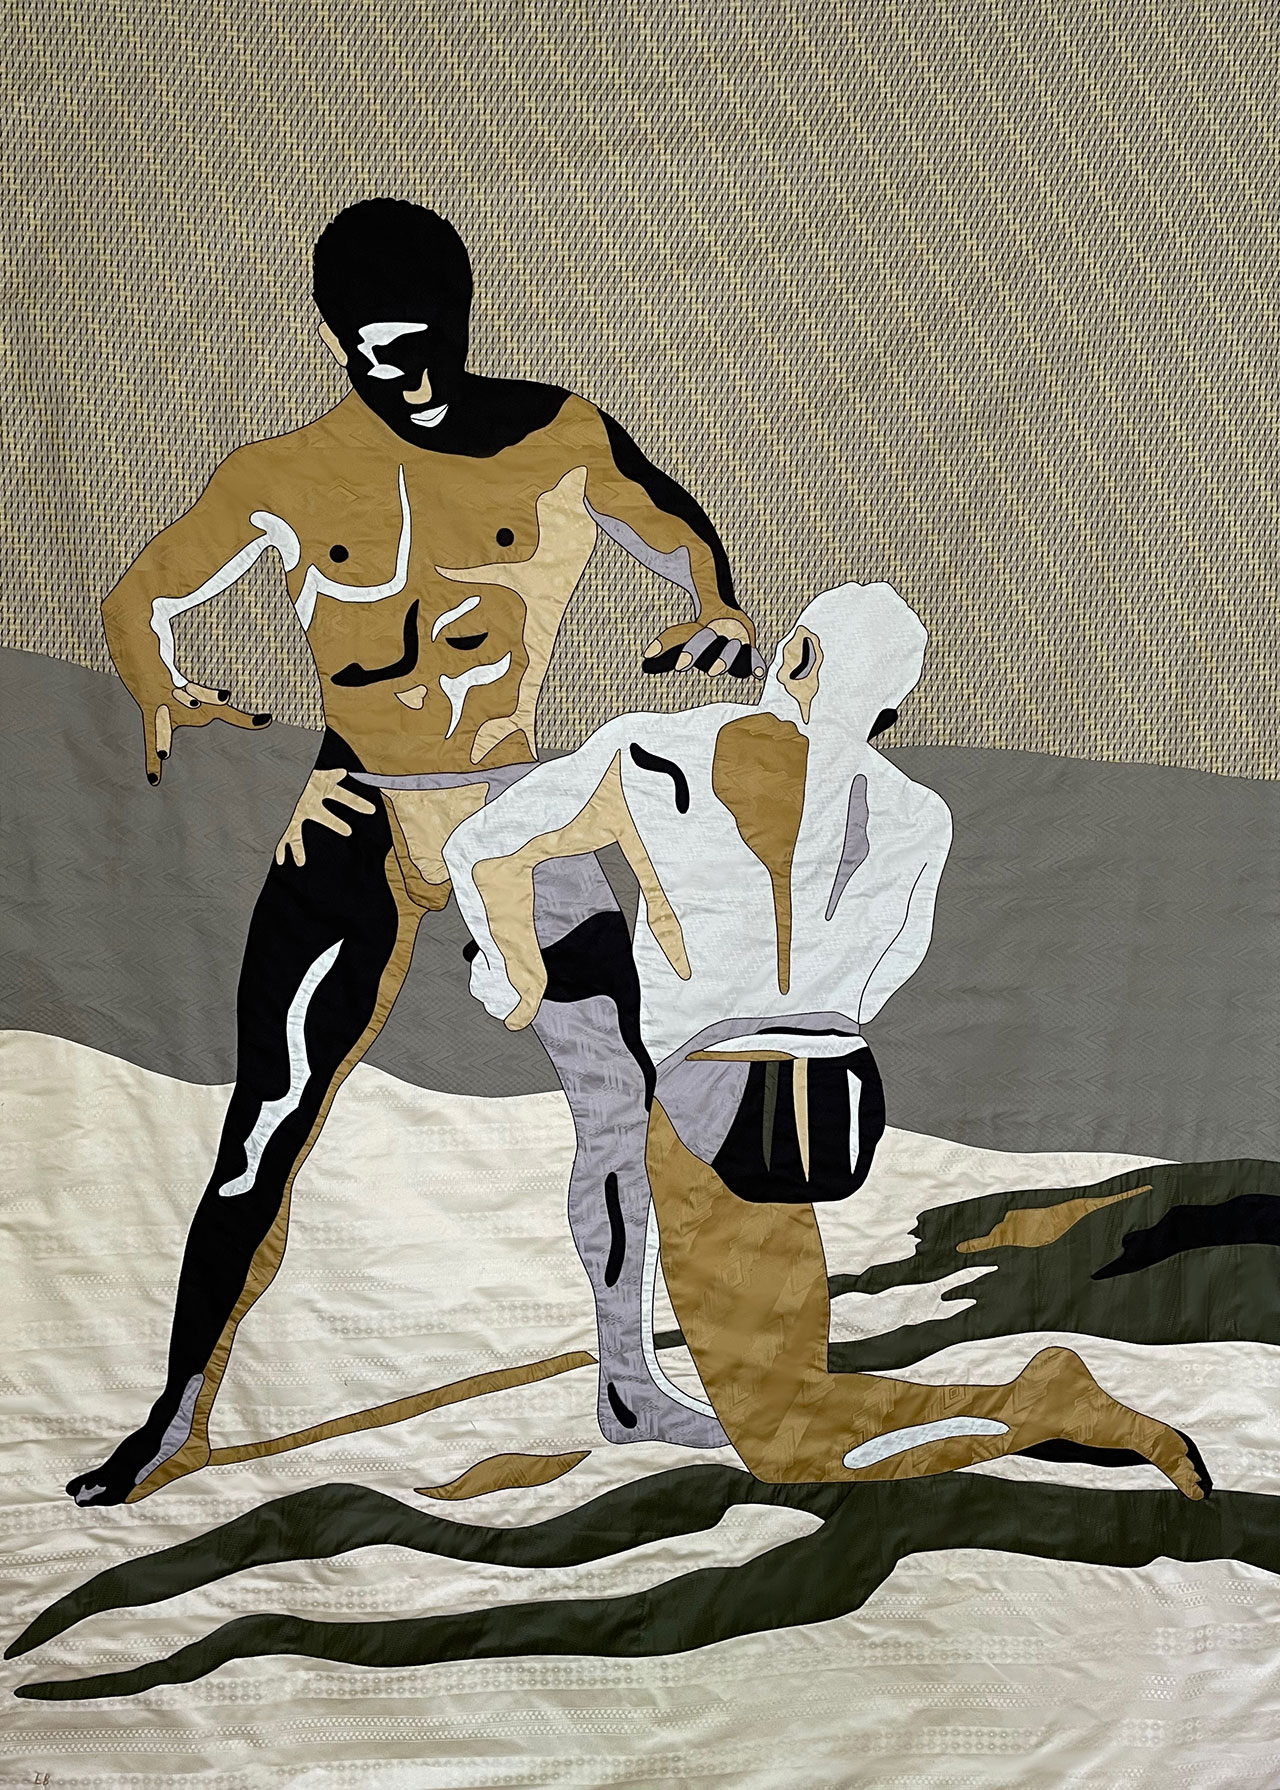 Louis Barthélemy, KHAYAMIYA 19 - THE ADVERSITY from the Lutteurs/Wrestlers series, 2021. Appliquéd and hand embroidered «bazins» on cotton canvas. Unique edition.